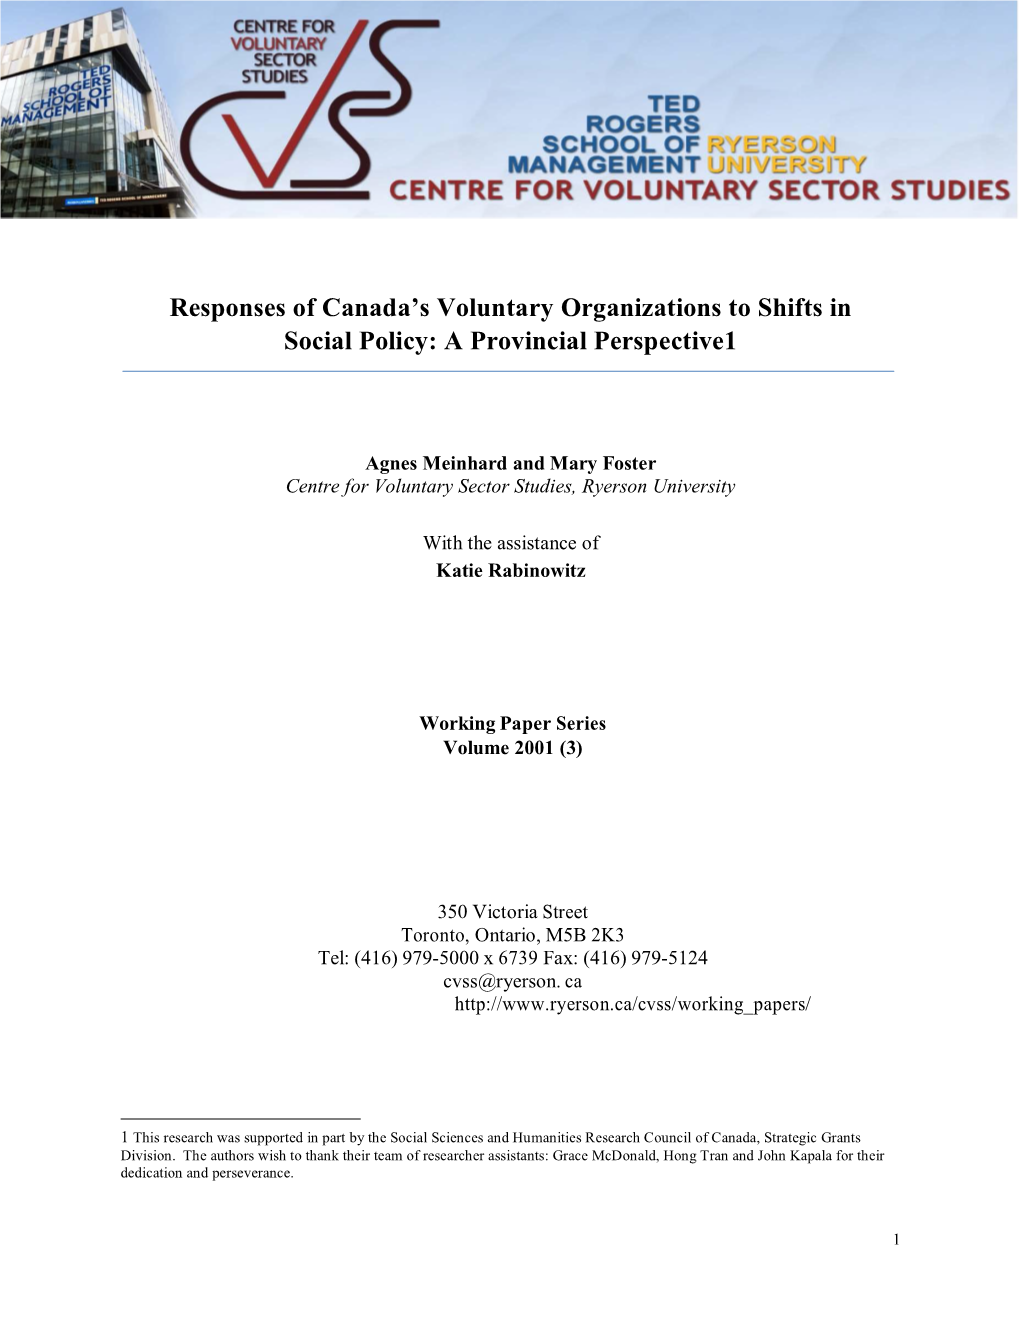 Responses of Canada=S Voluntary Organizations to Shifts in Social Policy